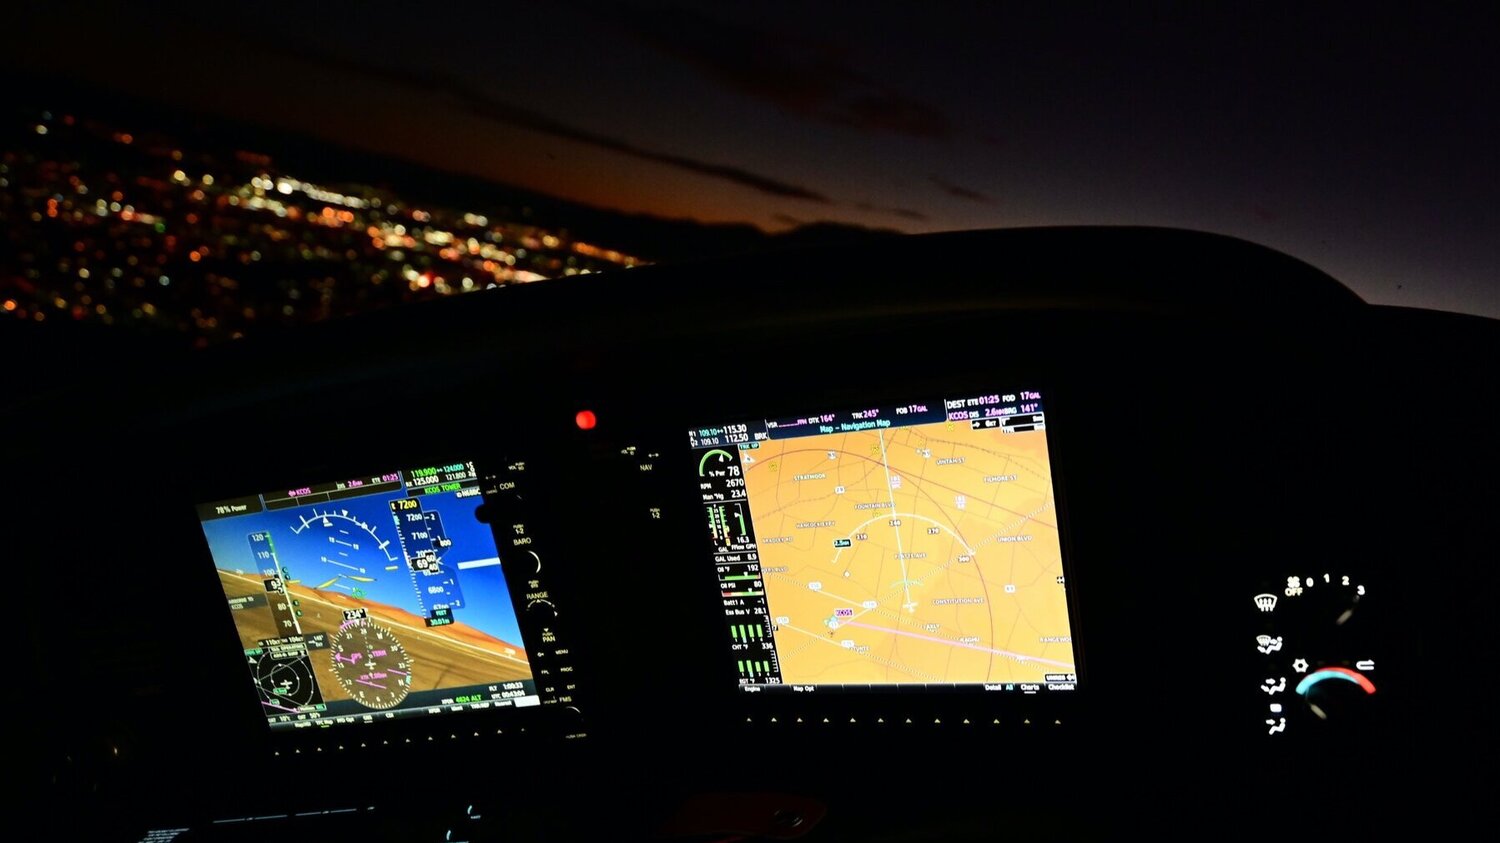 Cirrus and Garmin Perspective Avionics helps to enhance situational awareness during all types of flight